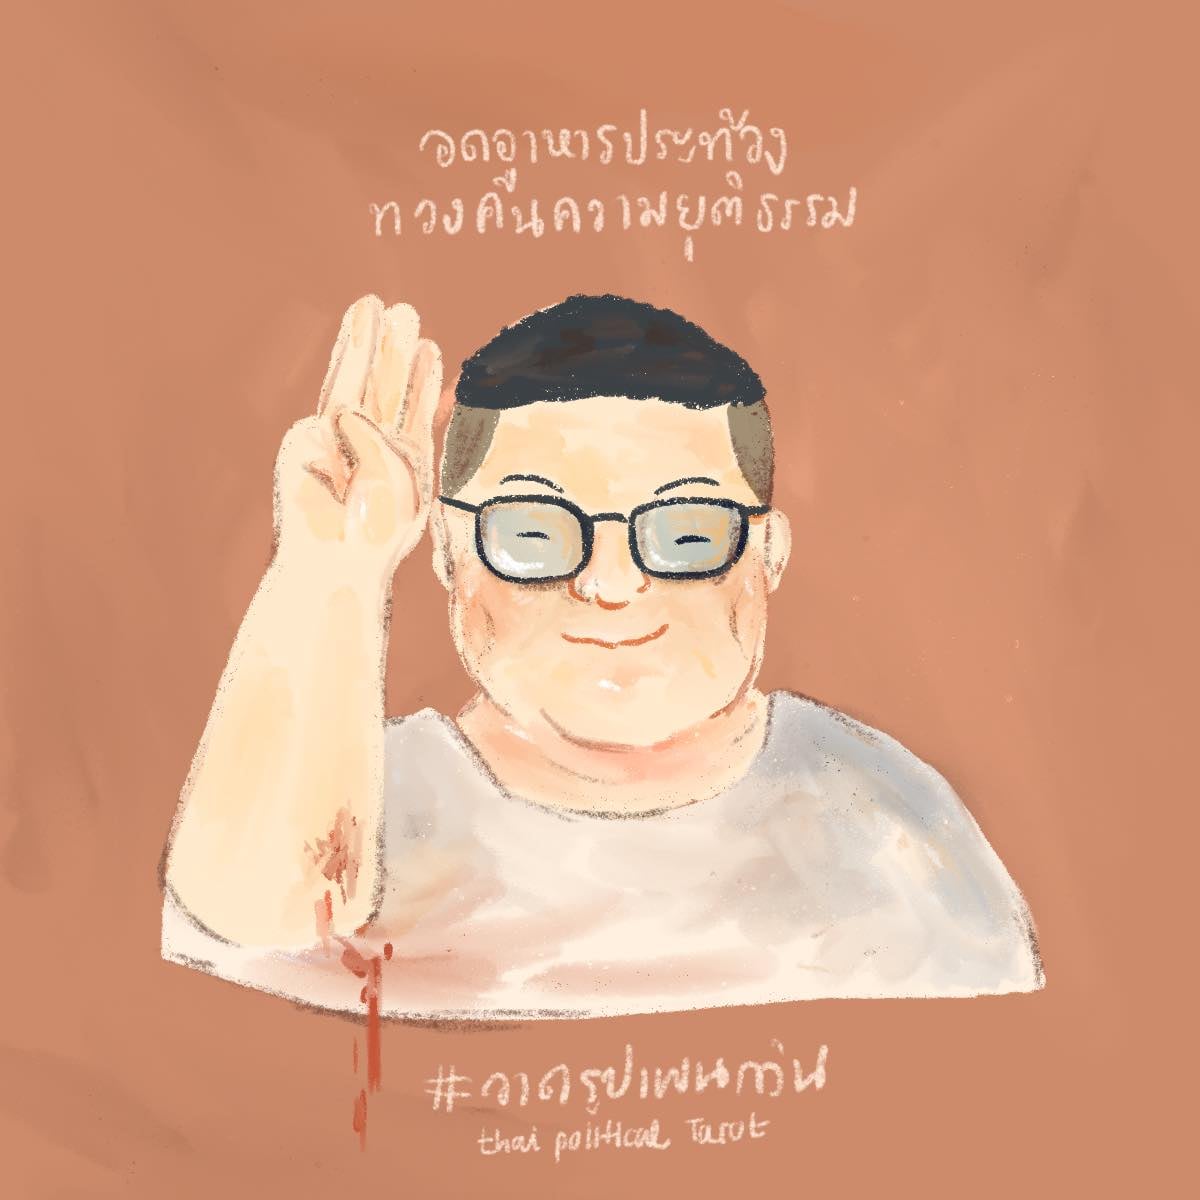 Penguin has been fighting for justice, equality and freedom in Thailand since he was 14. For his many speeches during in protest since August 2020 calling for monarchy reform, he has 19 charges against him.